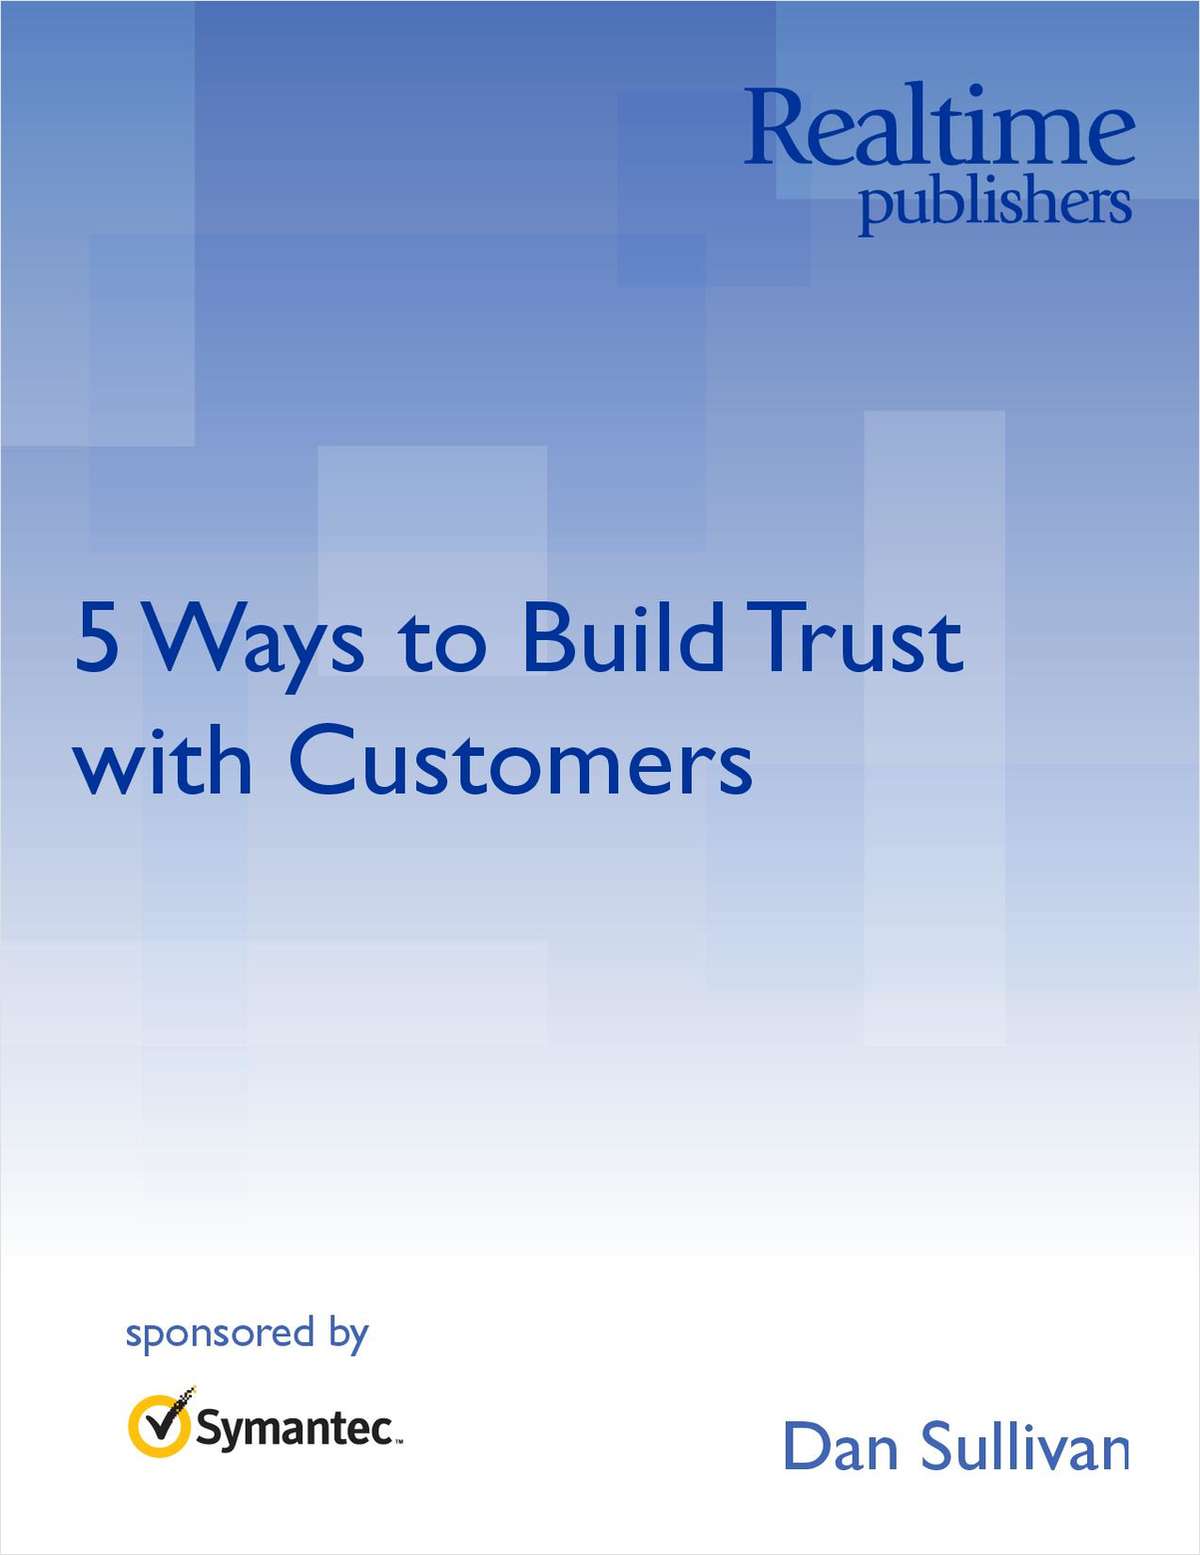 5 Ways to Build Trust with Customers